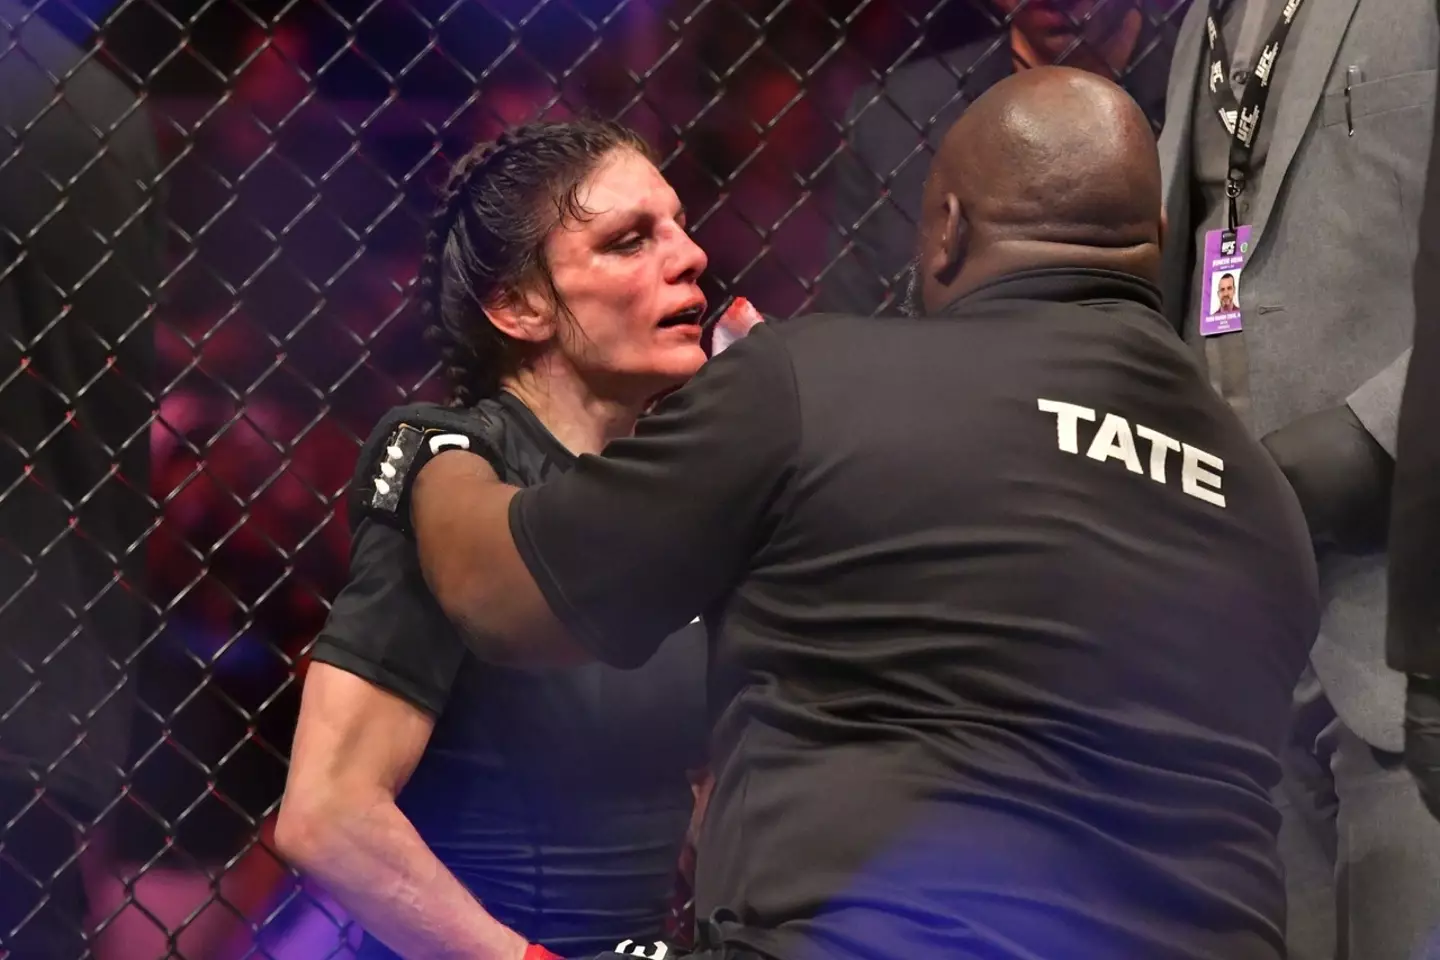 The American MMA star, who is recognised as the fourth-ranked women's flyweight, was taken apart by Jessica Andrade at UFC 283 on Saturday (21 January).